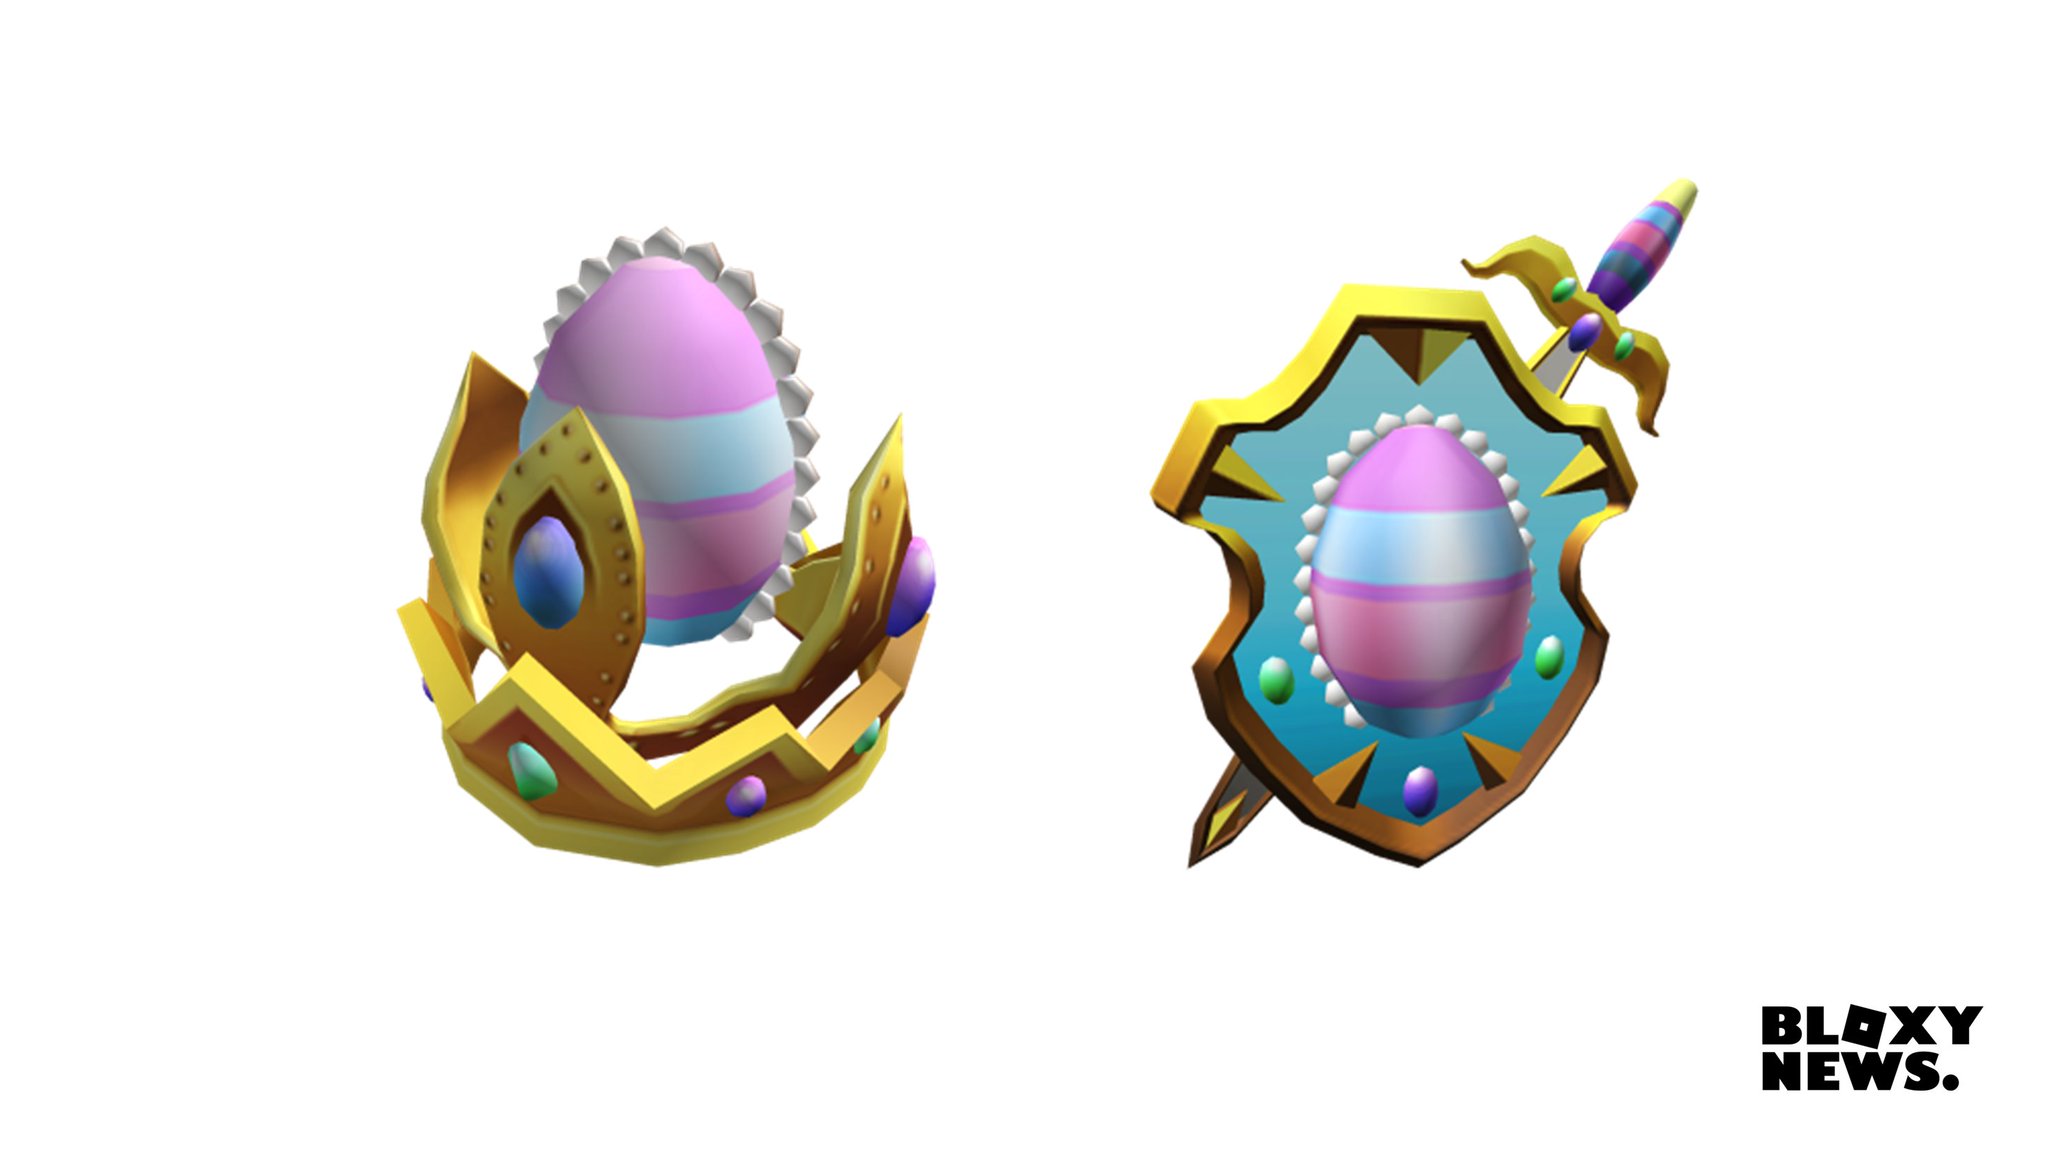 Bloxy News On Twitter A Few Egg Related Items Were Just Released On Roblox Lots Of People Speculate These Are Related To An Egg Hunt But Just A Reminder That Egg - bloxy news on twitter bloxynews 2 eggs for the roblox egghunt2019 scrambled in time have been leaked this year s eggmin admin egg and the brand new eggsclusive egg name unknown for